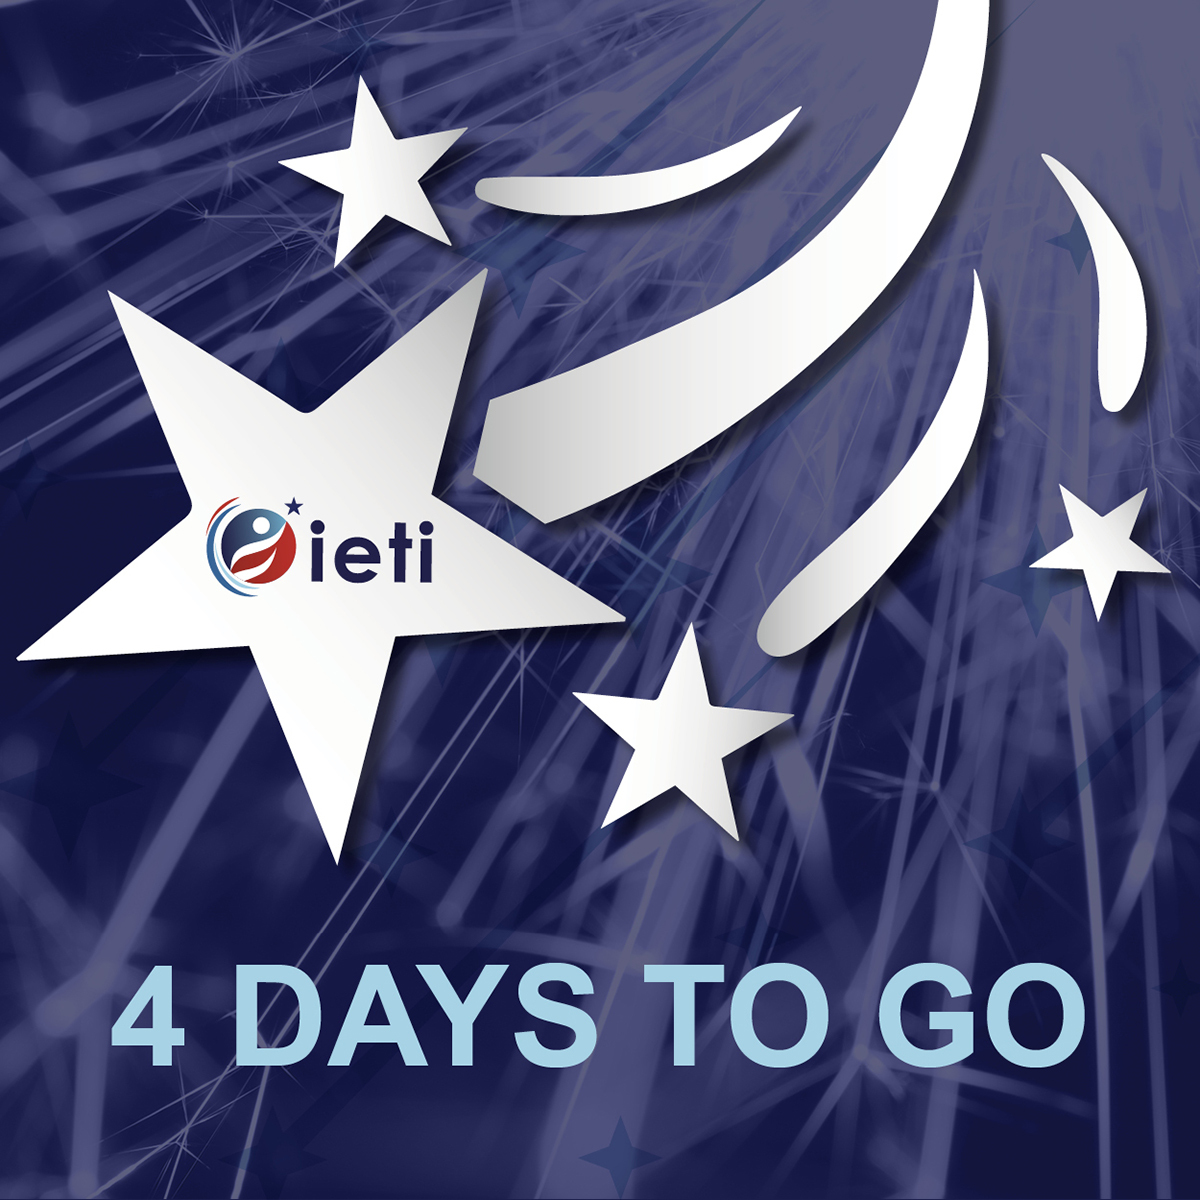 Only 4 more days until the grand opening of the Industries Education and Training Institute Campus (IETI) in Roodepoort! Don't miss out!

#IETI #SkillsDevelopment #artisan #training #electrician #millwright #plumber #welder #mechanicalfitter #carpenter #bricklayer